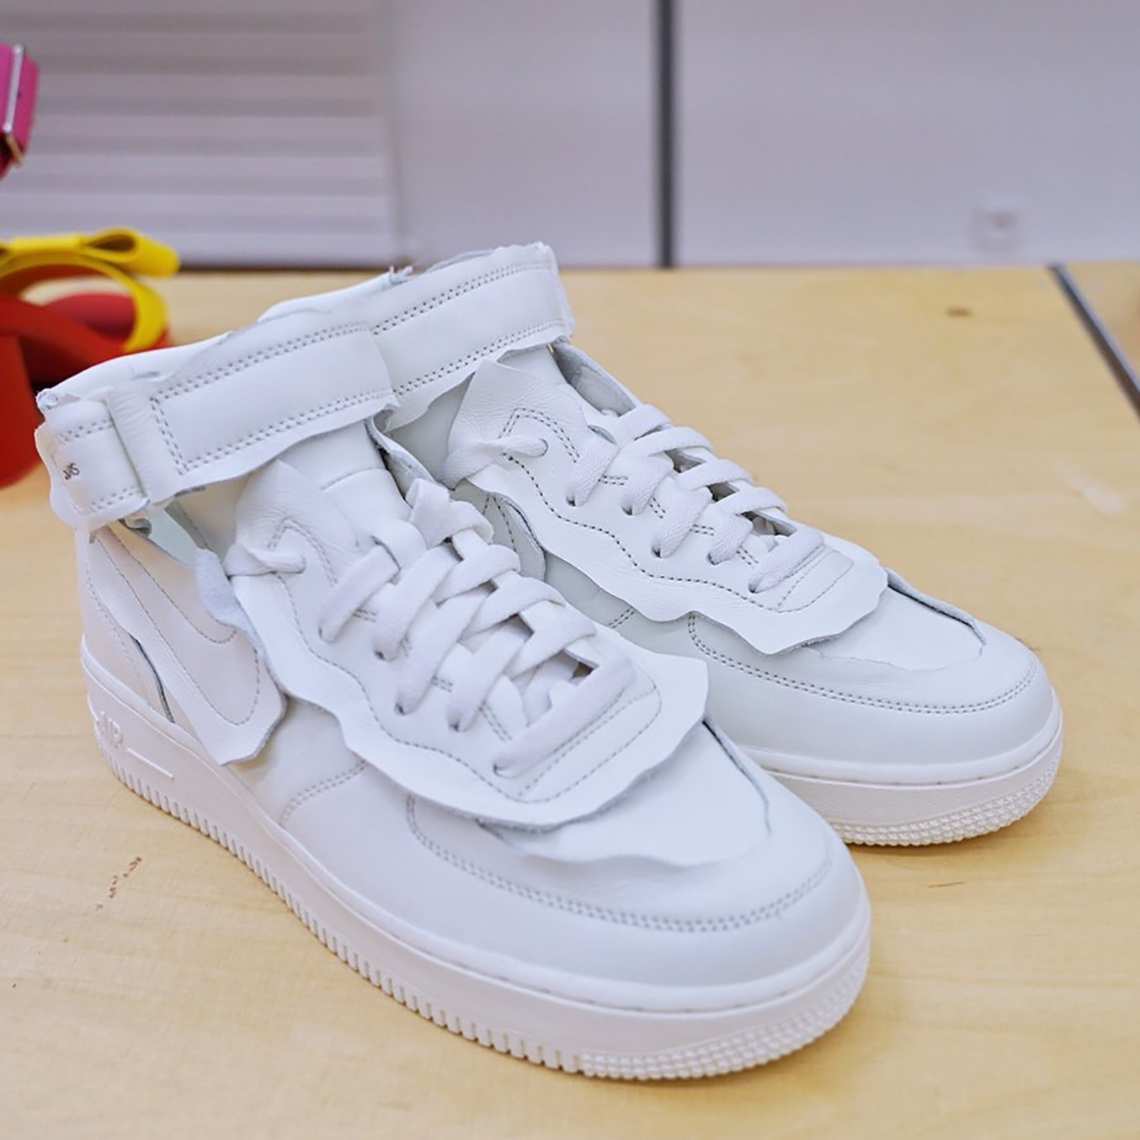 COMME des GARCONS Nike Air Force 1 AW 2020 Release Info | SneakerNews.com